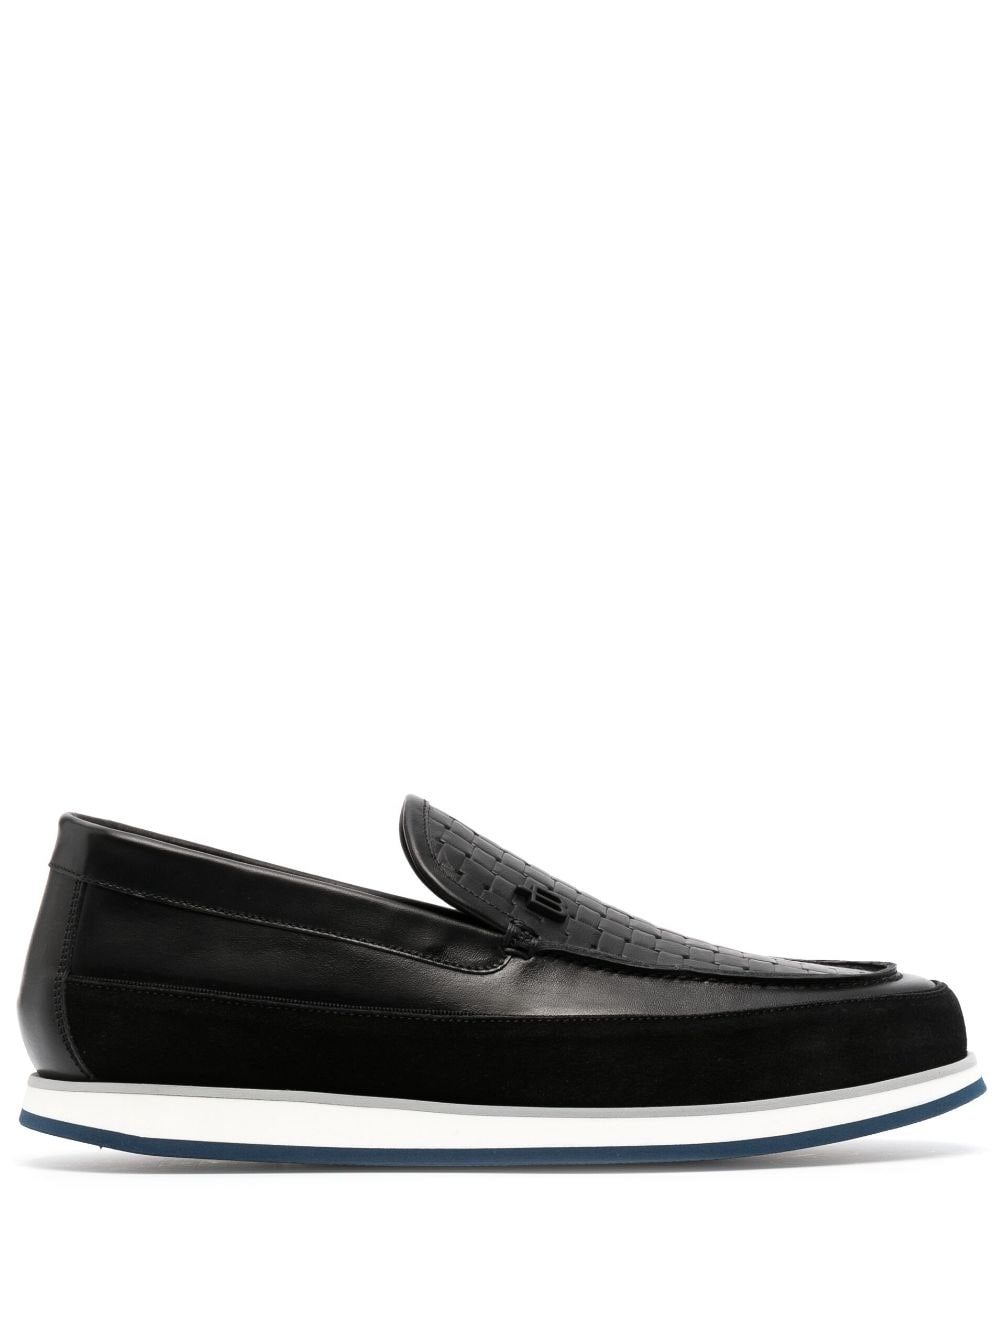 smooth grain leather loafers